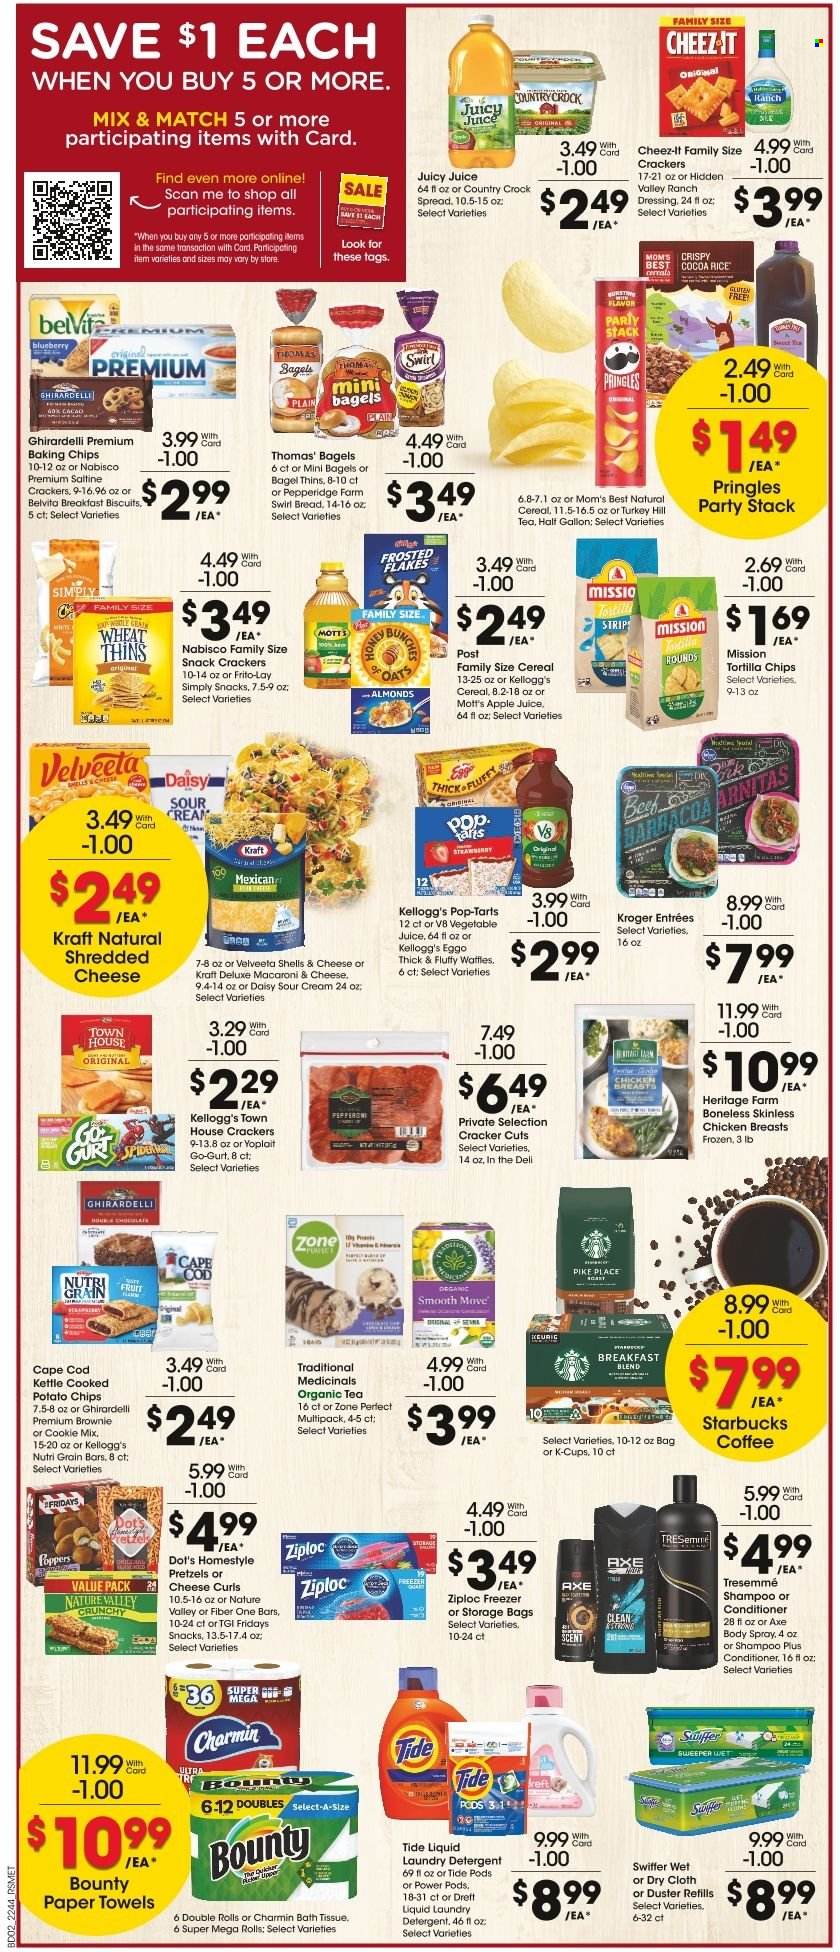 thumbnail - Pick ‘n Save Flyer - 11/30/2022 - 12/06/2022 - Sales products - bagels, pretzels, brownies, waffles, Mott's, cod, macaroni & cheese, Kraft®, pepperoni, shredded cheese, Yoplait, sour cream, ranch dressing, strips, snack, Bounty, crackers, Kellogg's, biscuit, Pop-Tarts, Ghirardelli, tortilla chips, potato chips, Pringles, Thins, Frito-Lay, Cheez-It, baking chips, cereals, belVita, Mom's Best, cocoa rice, Nature Valley, Fiber One, Zone Perfect, Nutri-Grain, dressing, almonds, apple juice, juice, vegetable juice, tea, coffee, Starbucks, coffee capsules, K-Cups, breakfast blend, chicken breasts, bath tissue, kitchen towels, paper towels, Charmin, detergent, Swiffer, Tide, laundry detergent, shampoo, conditioner, TRESemmé, body spray, Axe, storage bag, Ziploc. Page 2.